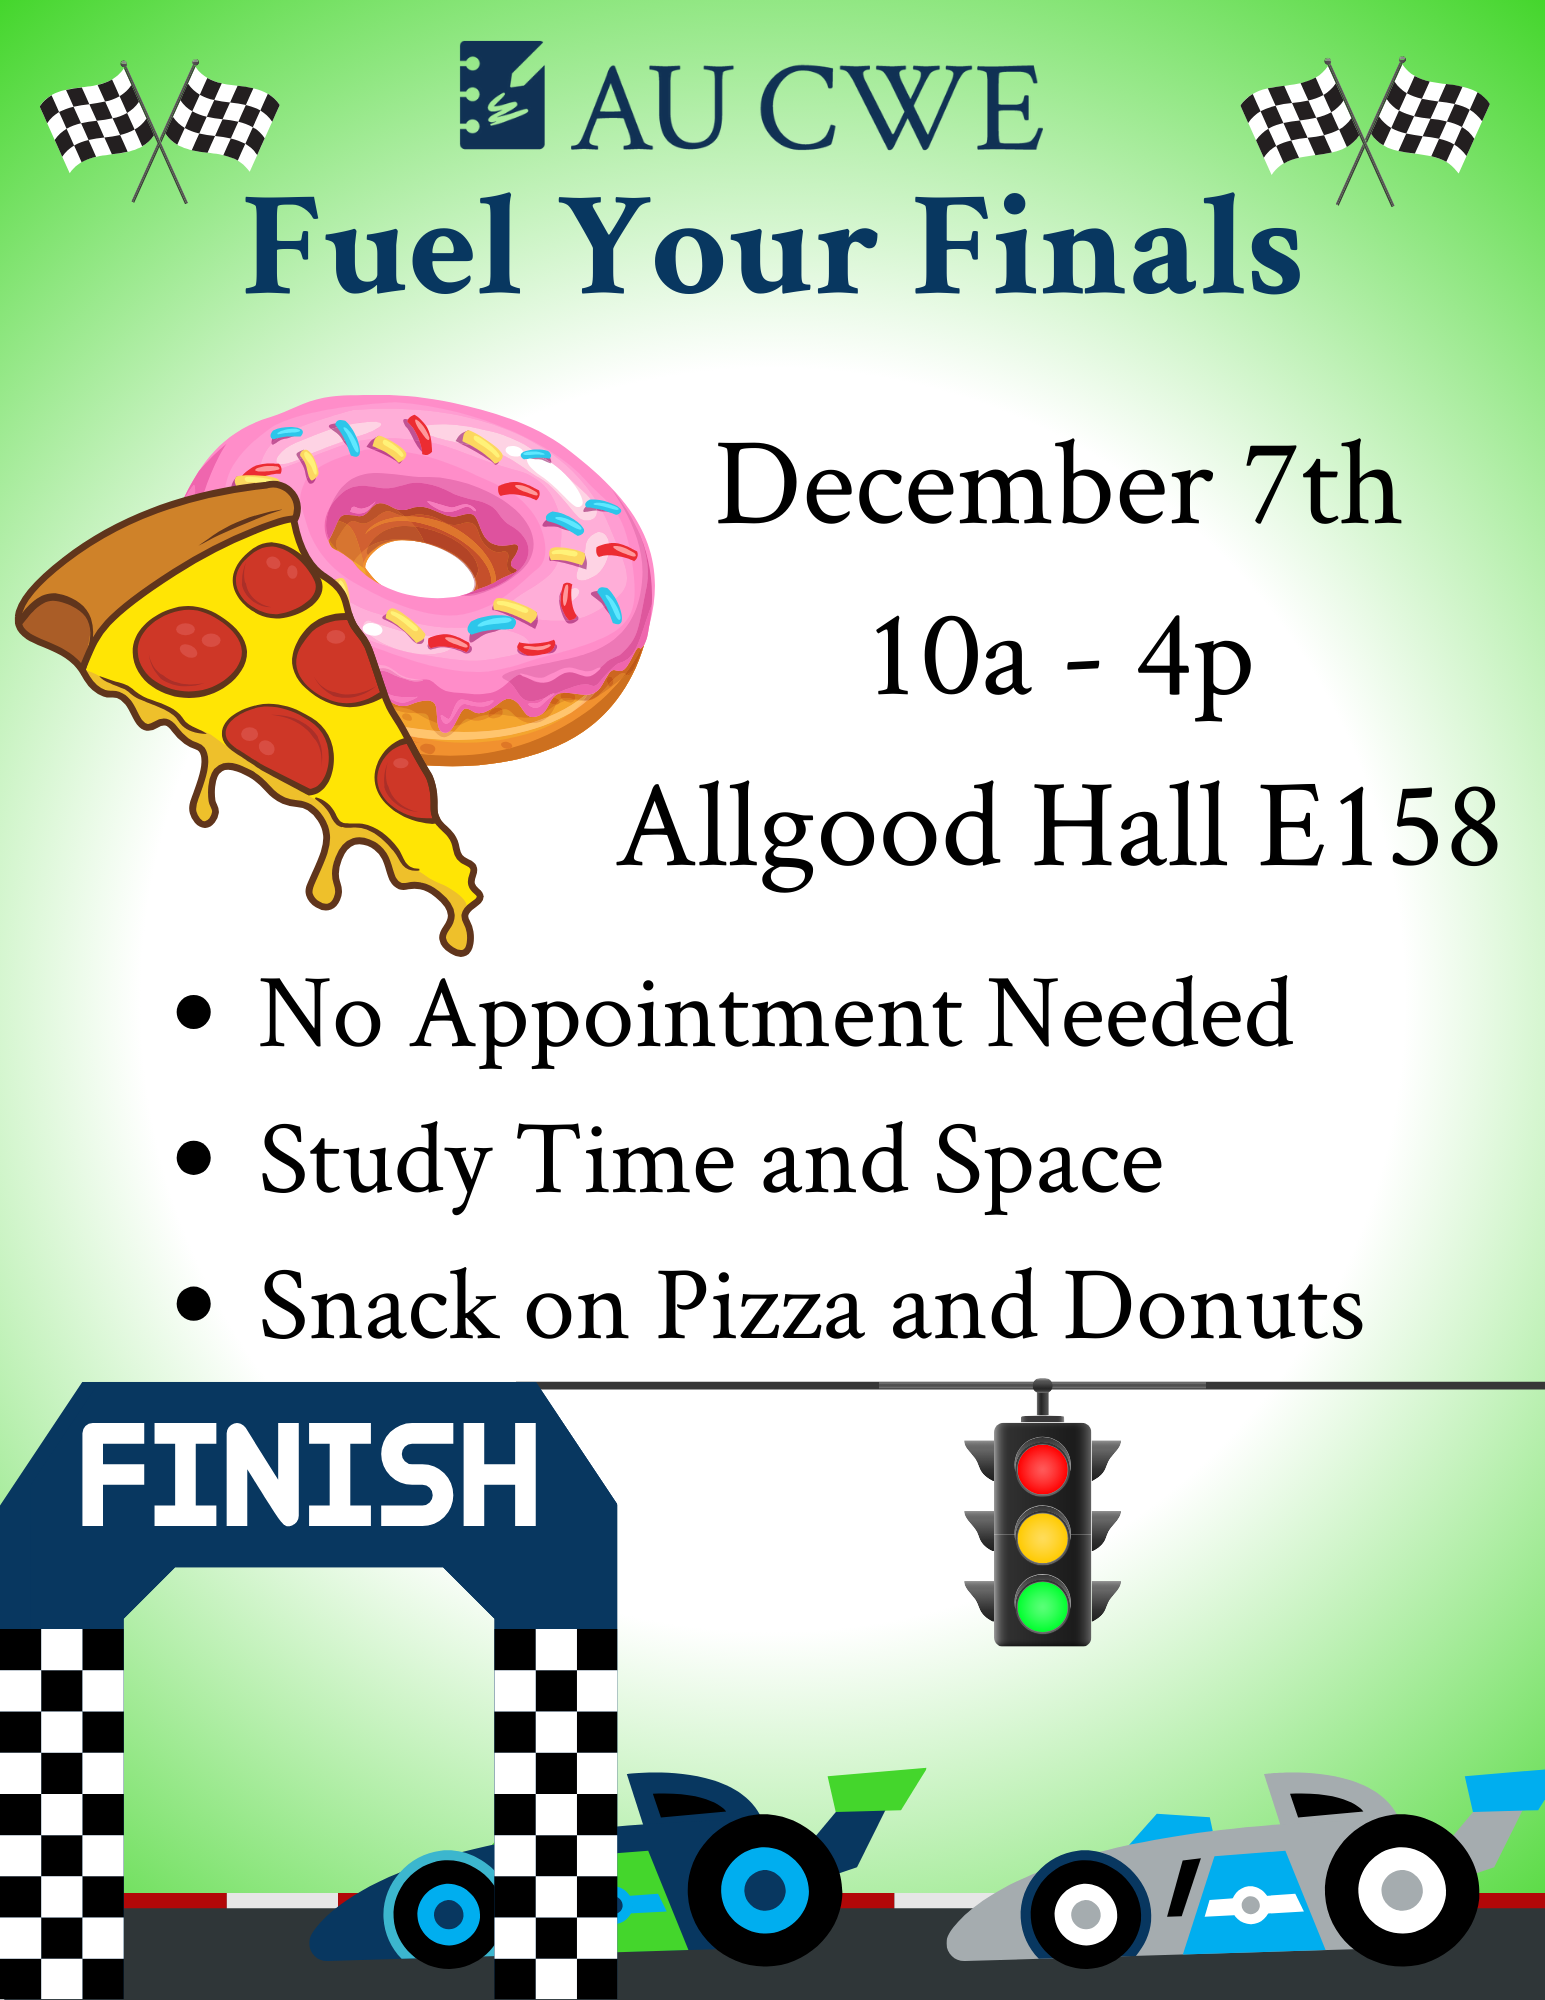 Fuel your Finals. Allgood Hall E158. 10 am to 4 pm. Pizza and Donuts served.